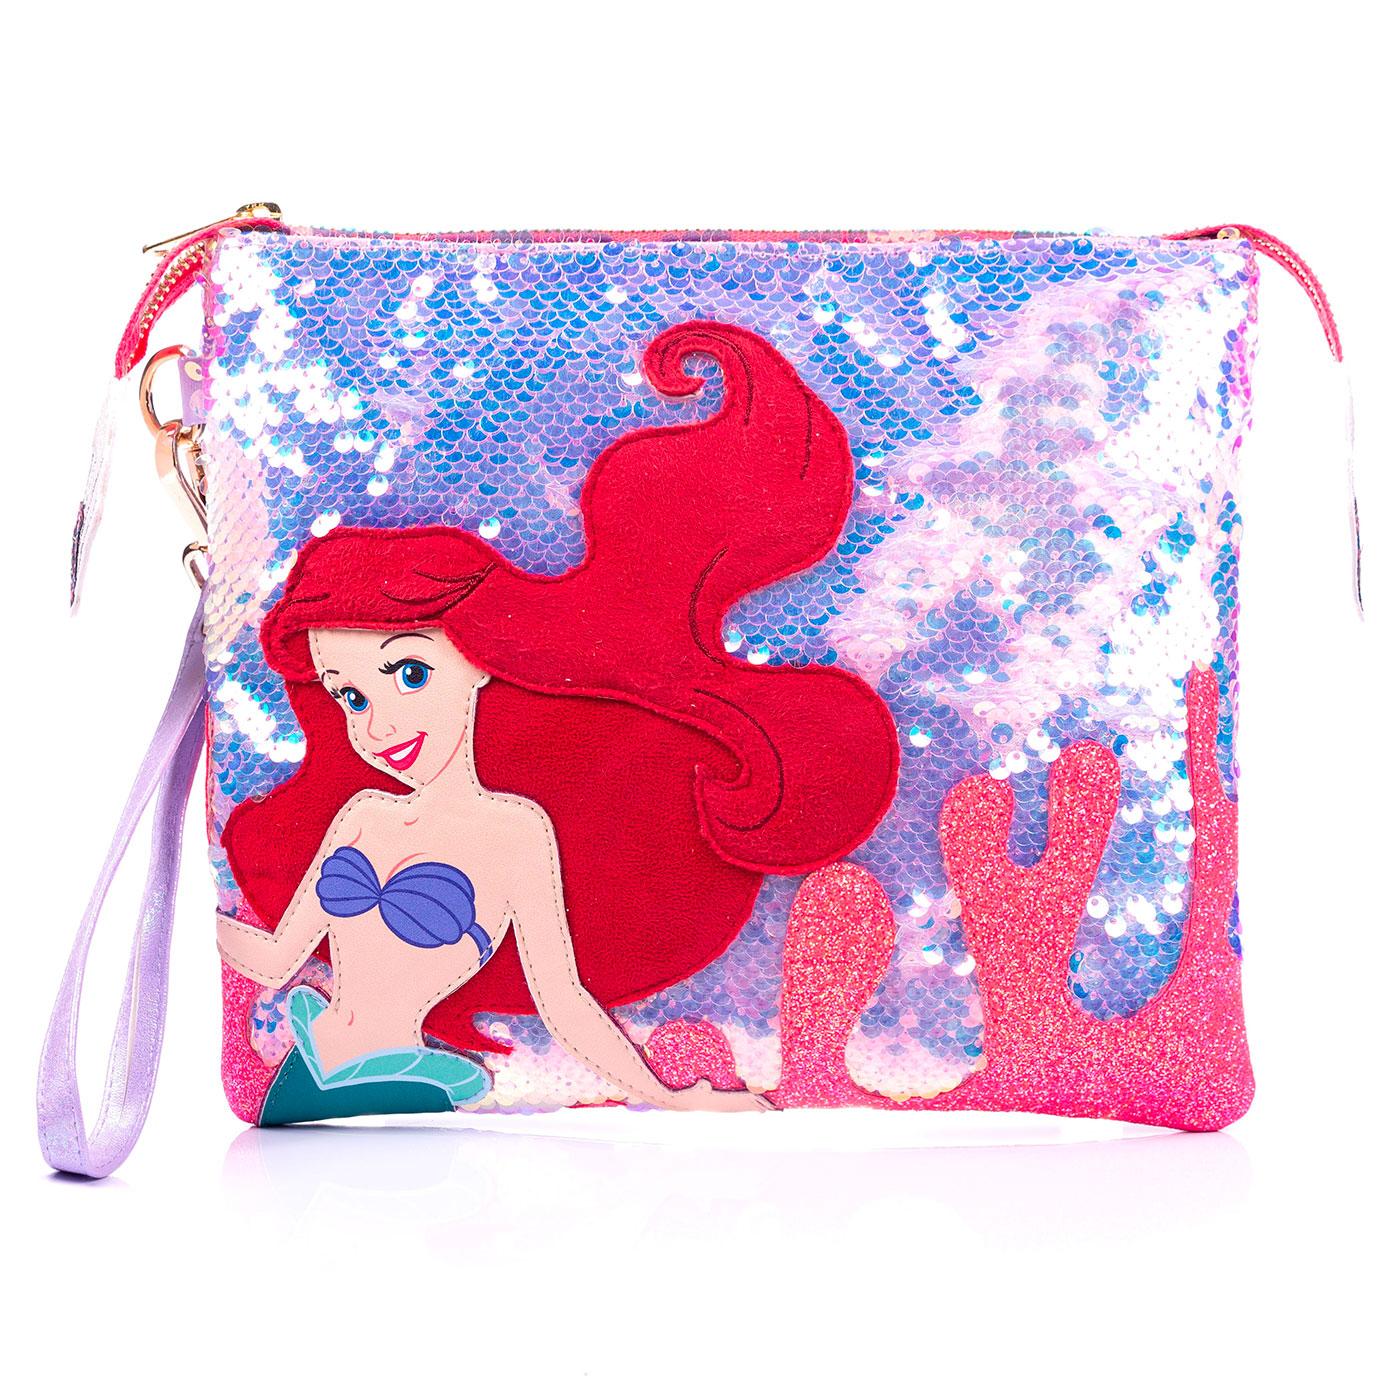 Just Me & The Sea IRREGULAR CHOICE Glitter Pouch